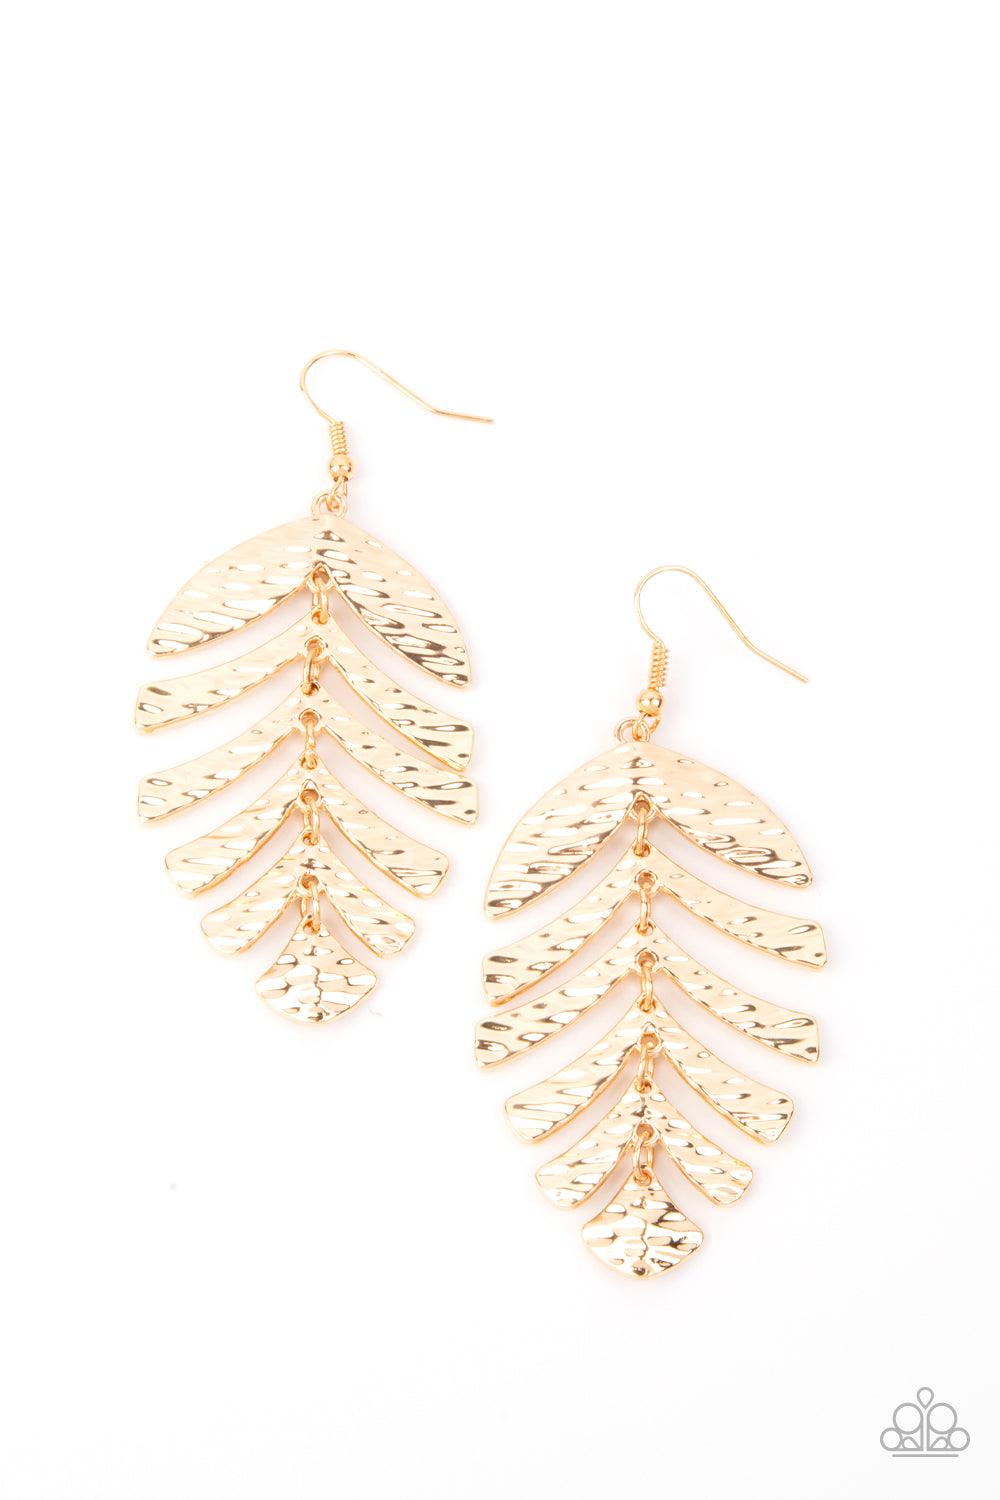 Paparazzi Accessories Palm Lagoon - Gold Rippling with tactile textures, dainty gold frames link into a dancing palm leaf for a simply seasonal fashion. Earring attaches to a standard fishhook fitting. Sold as one pair of earrings. Jewelry